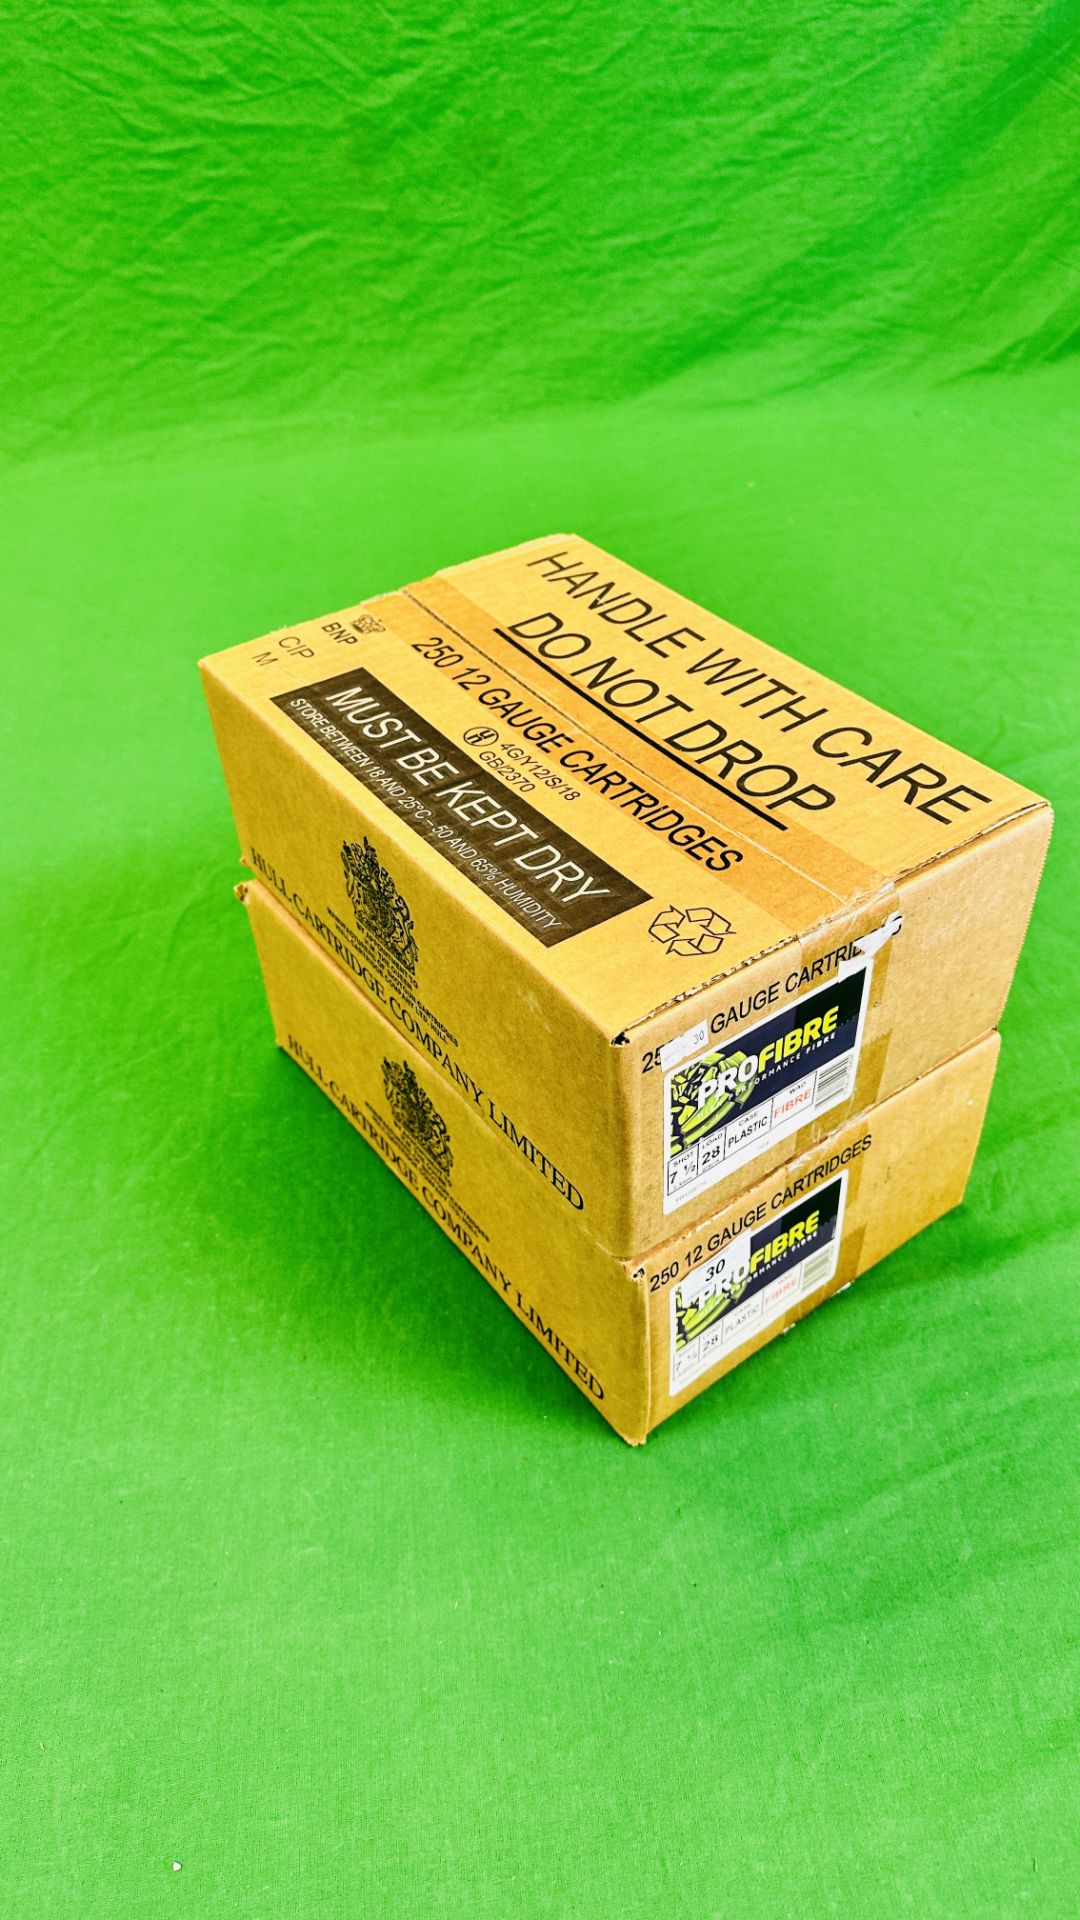 500 X HULL CARTRIDGES 12 GAUGE PRO FIBRE 28G 7½ SHOT FIBRE WAD CARTRIDGES - (TO BE COLLECTED IN - Image 4 of 4